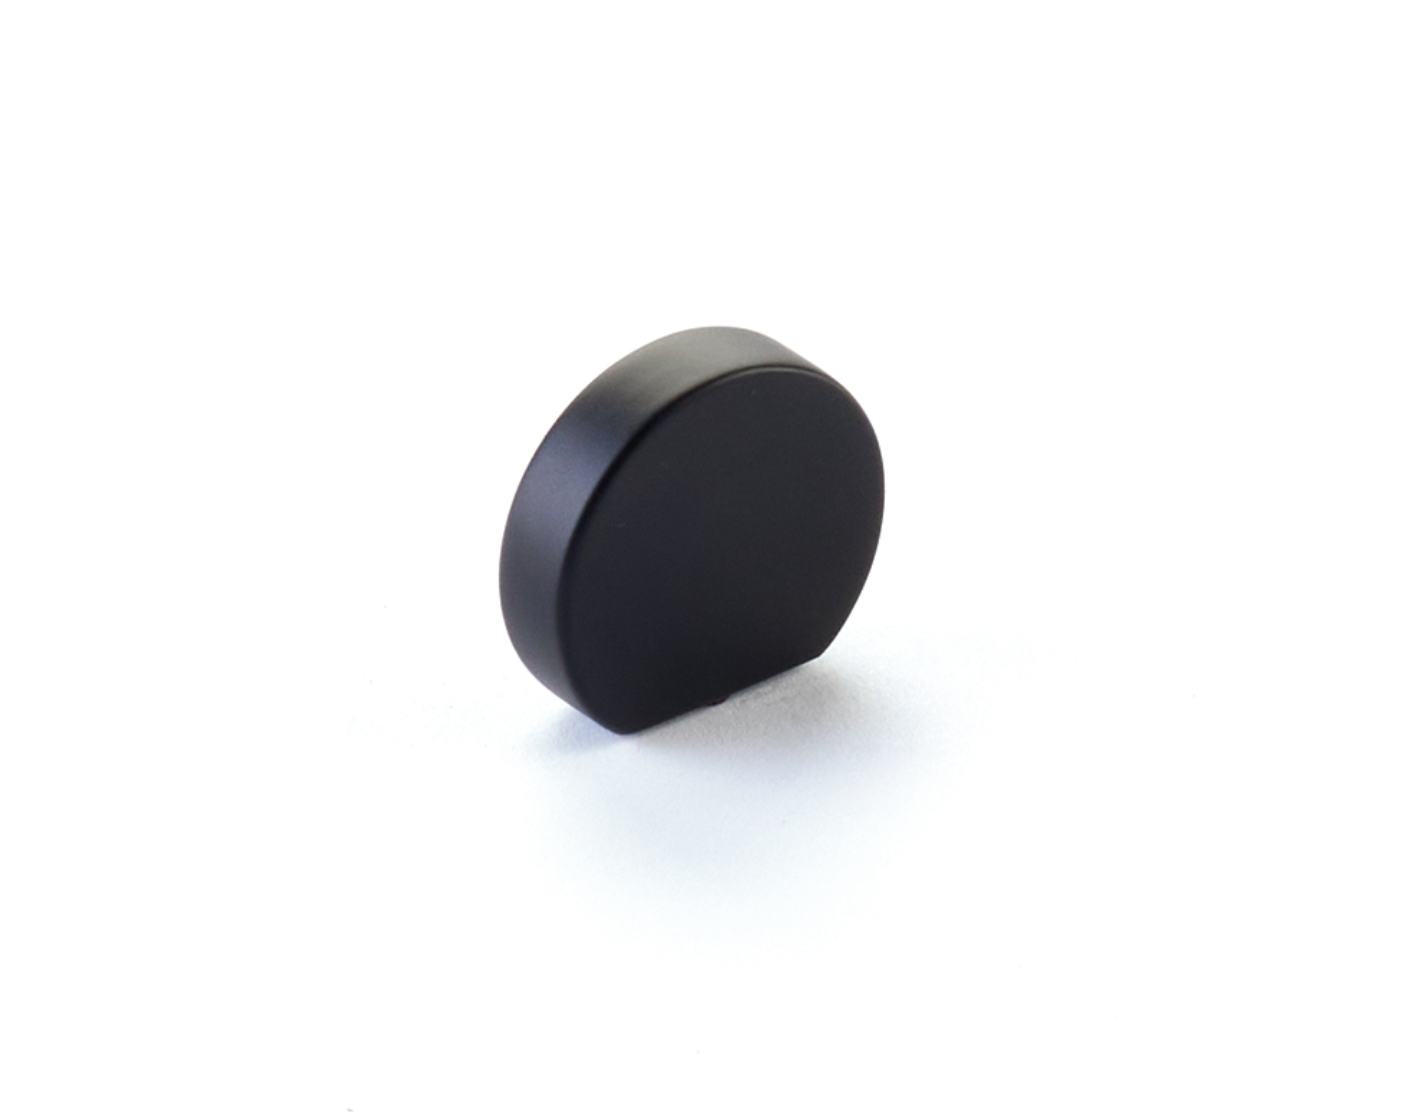 Matte Black "Bit" Rounded Drawer Pulls and Cabinet Knobs - Industry Hardware